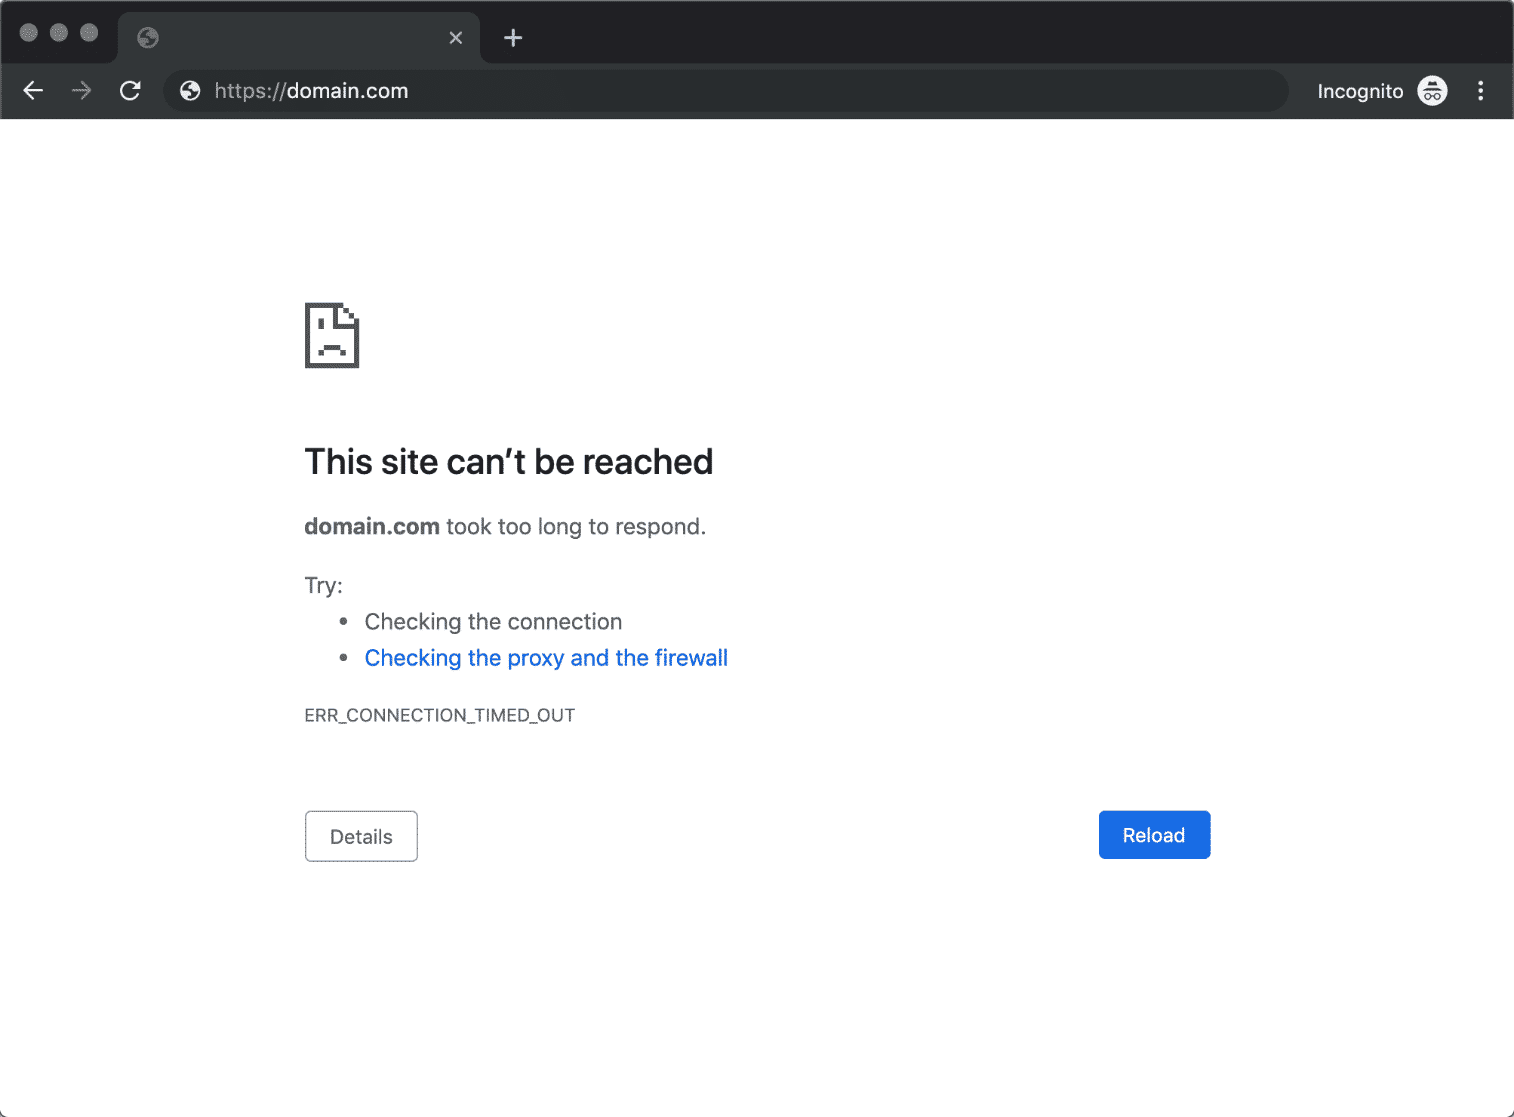 What does this site can